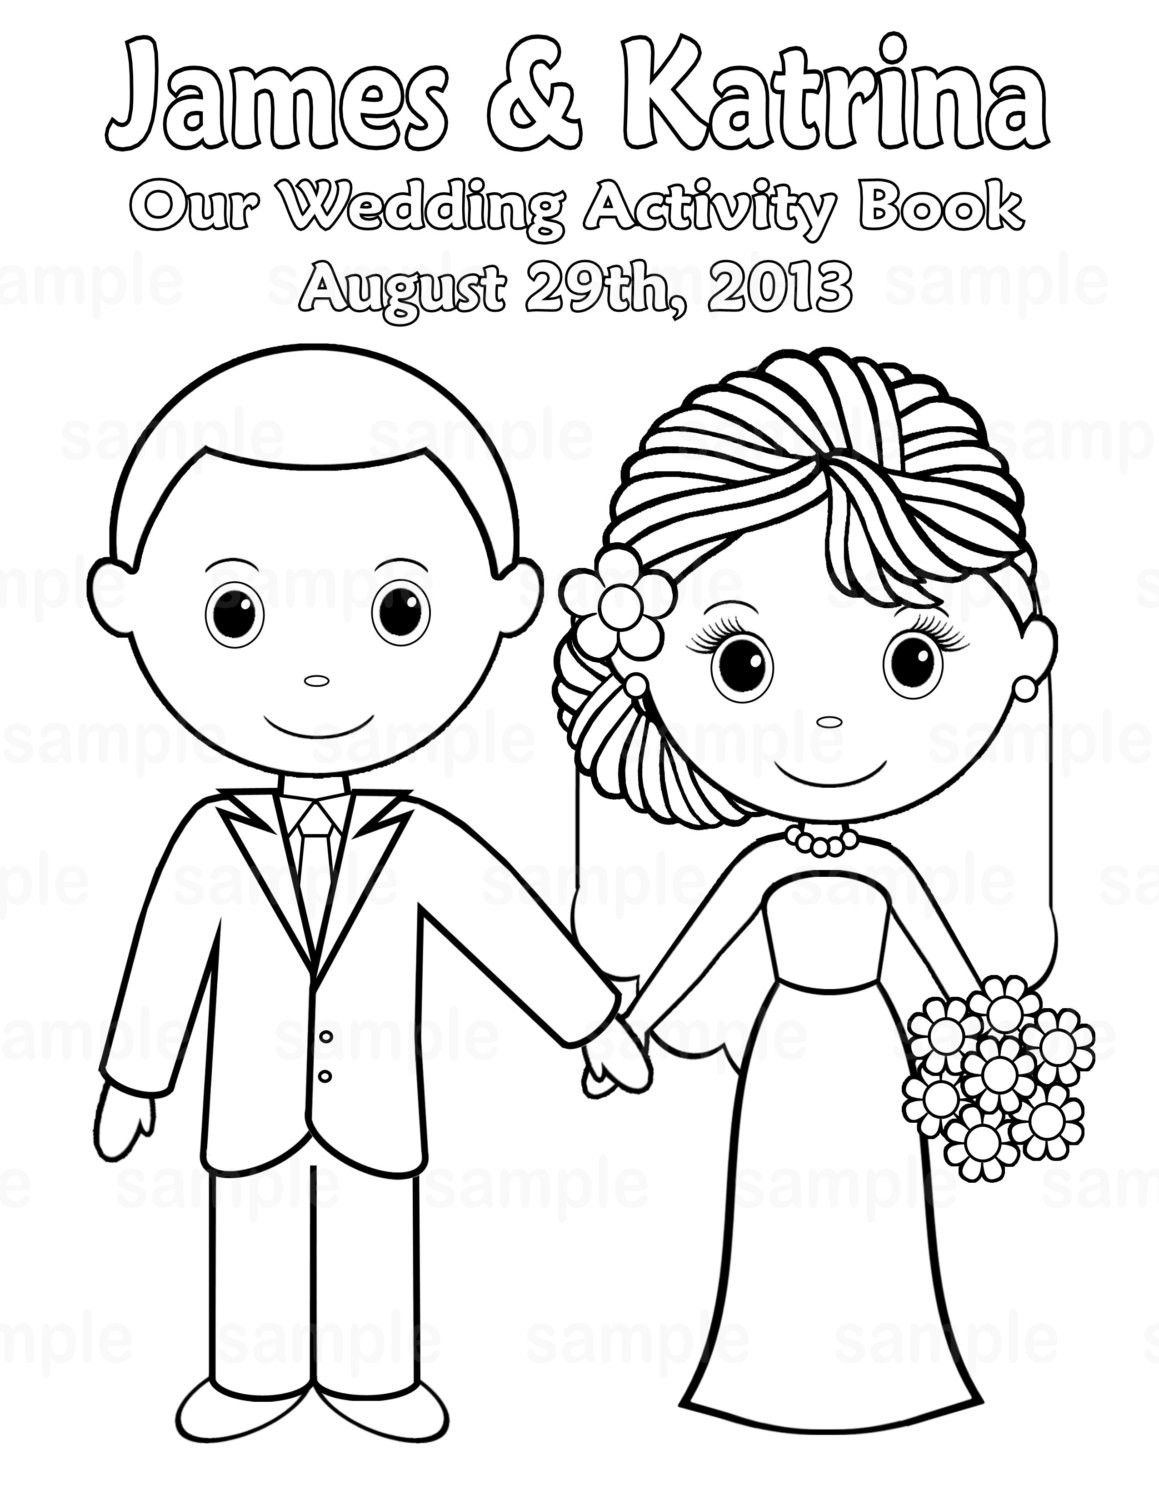 Free Printable Wedding Coloring Pages | Free Printable Wedding - Free Printable Personalized Wedding Coloring Book